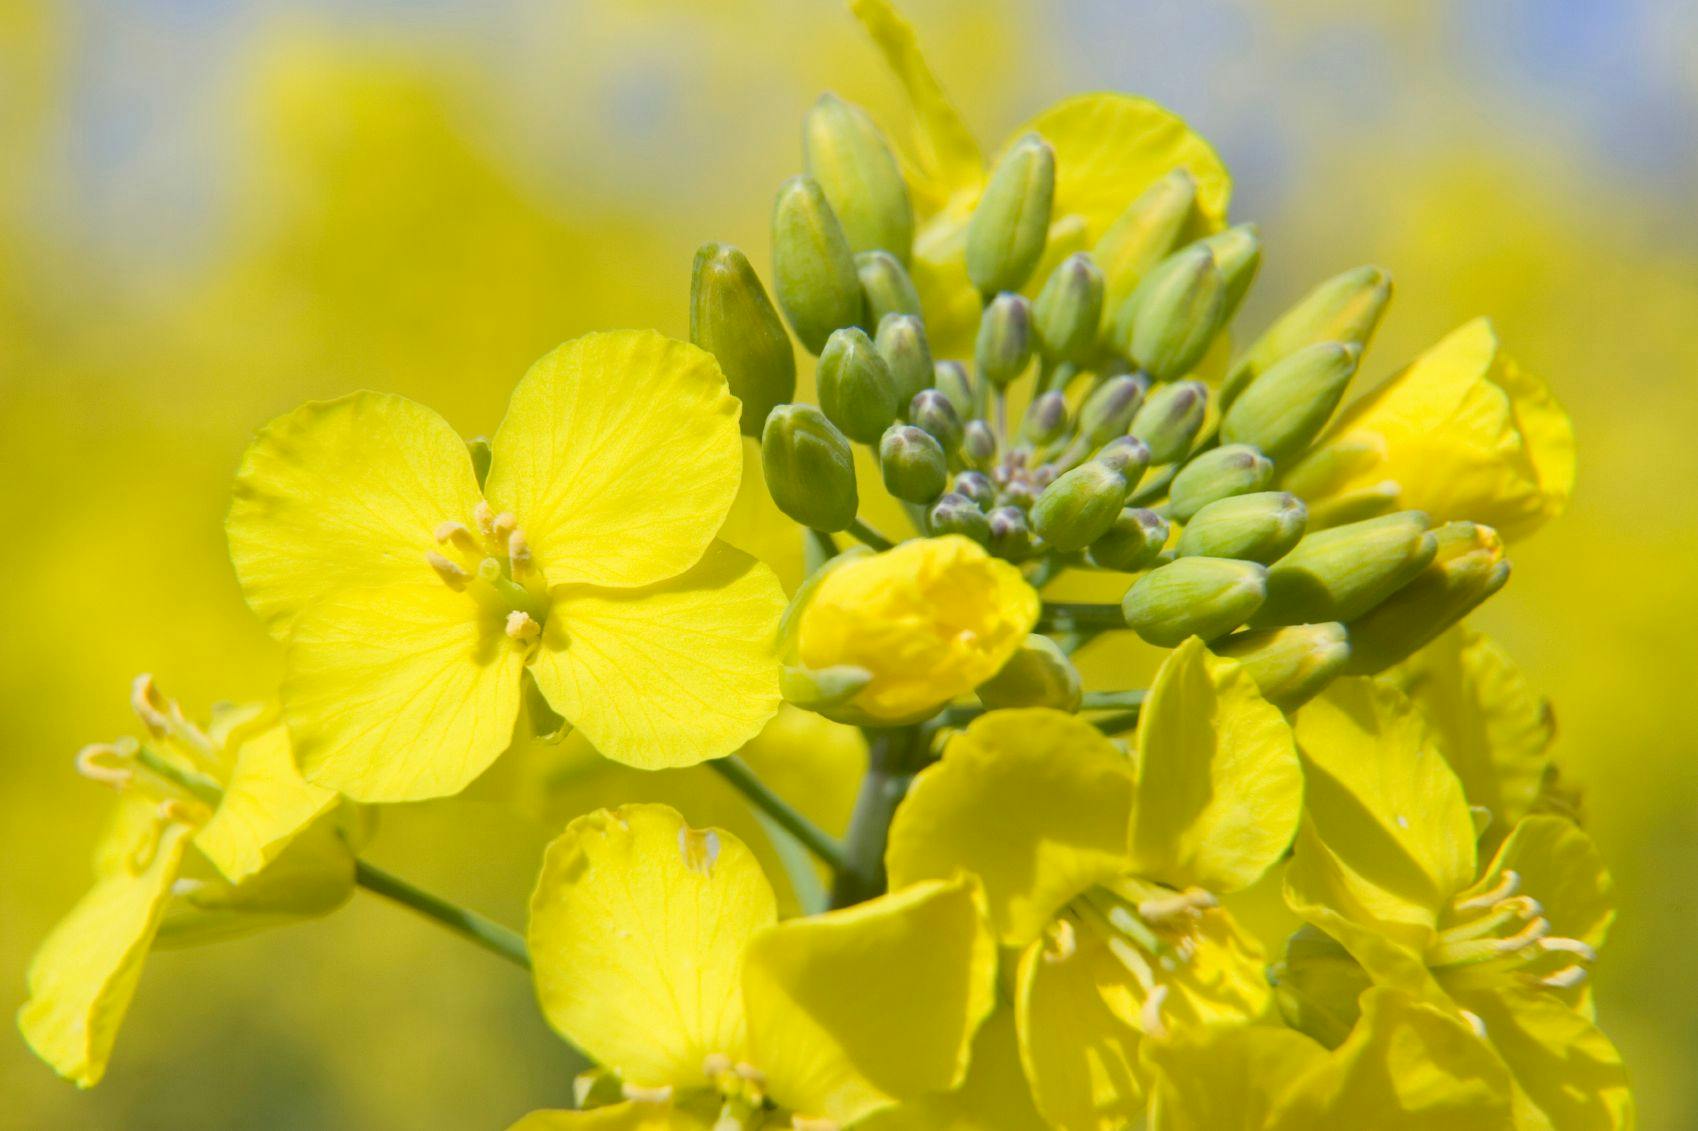 Canola Oil Has Benefits Over Saturated Fatty Oils